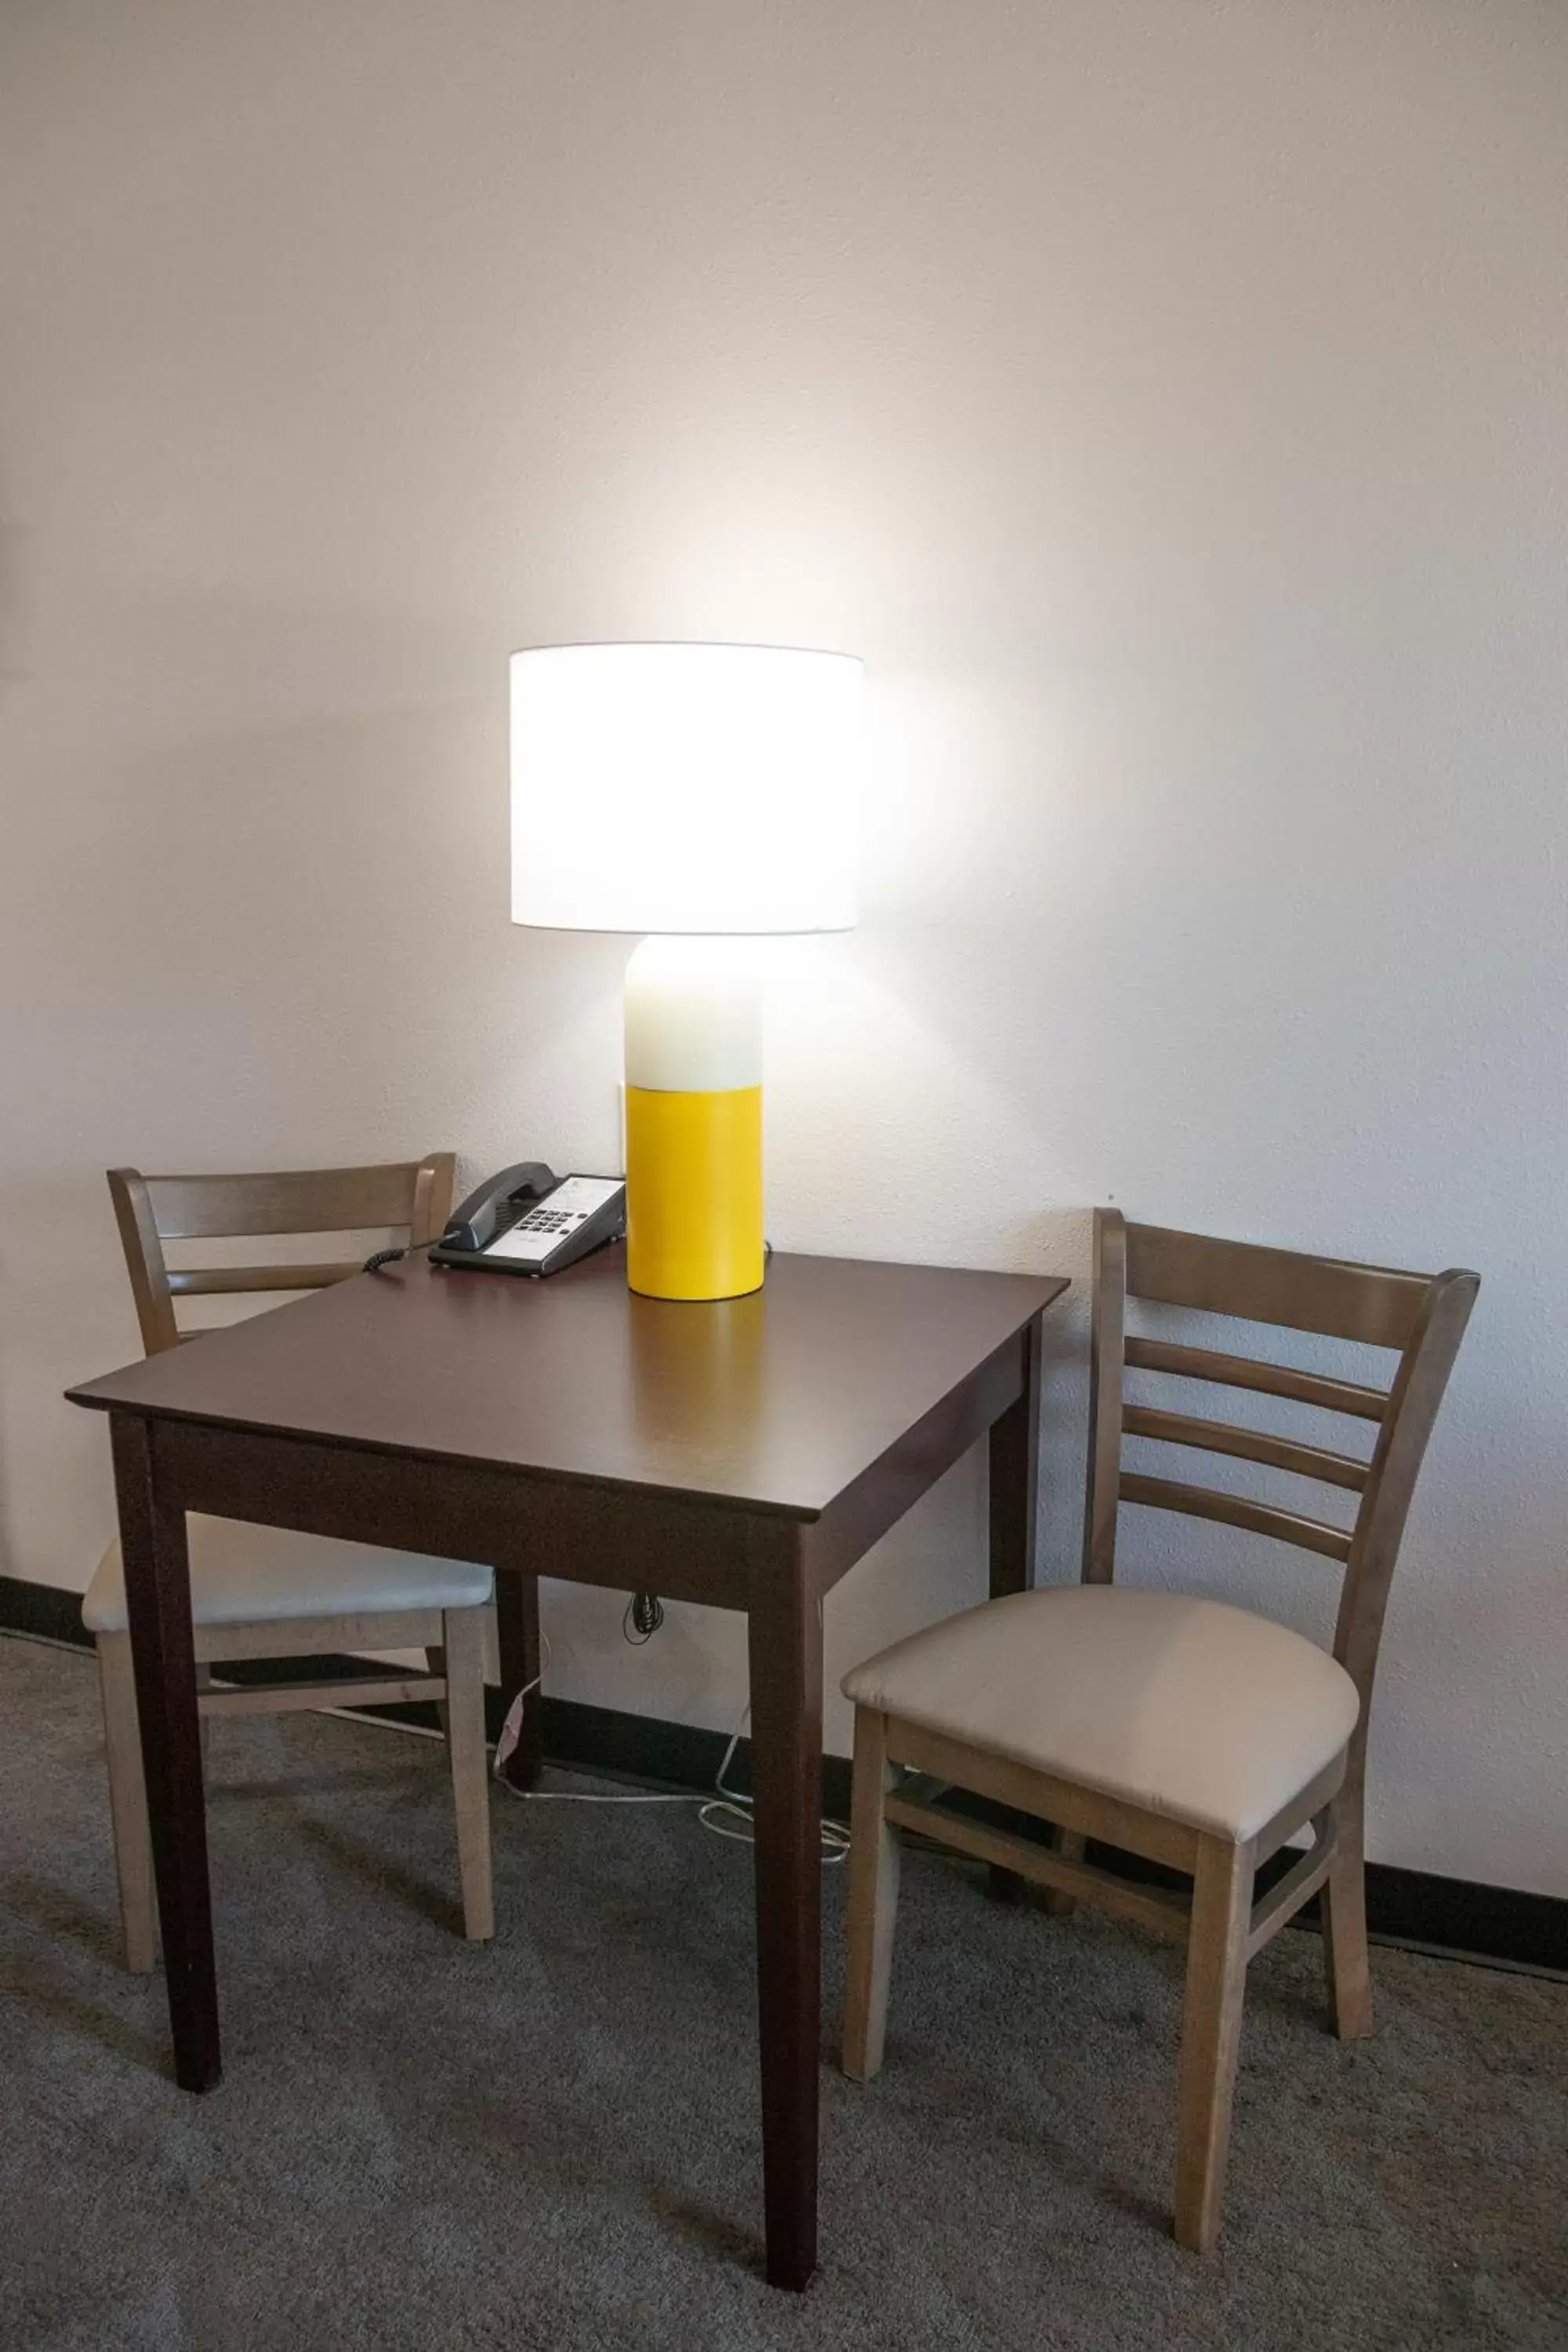 Dining Area in Comfort Inn Sioux City South